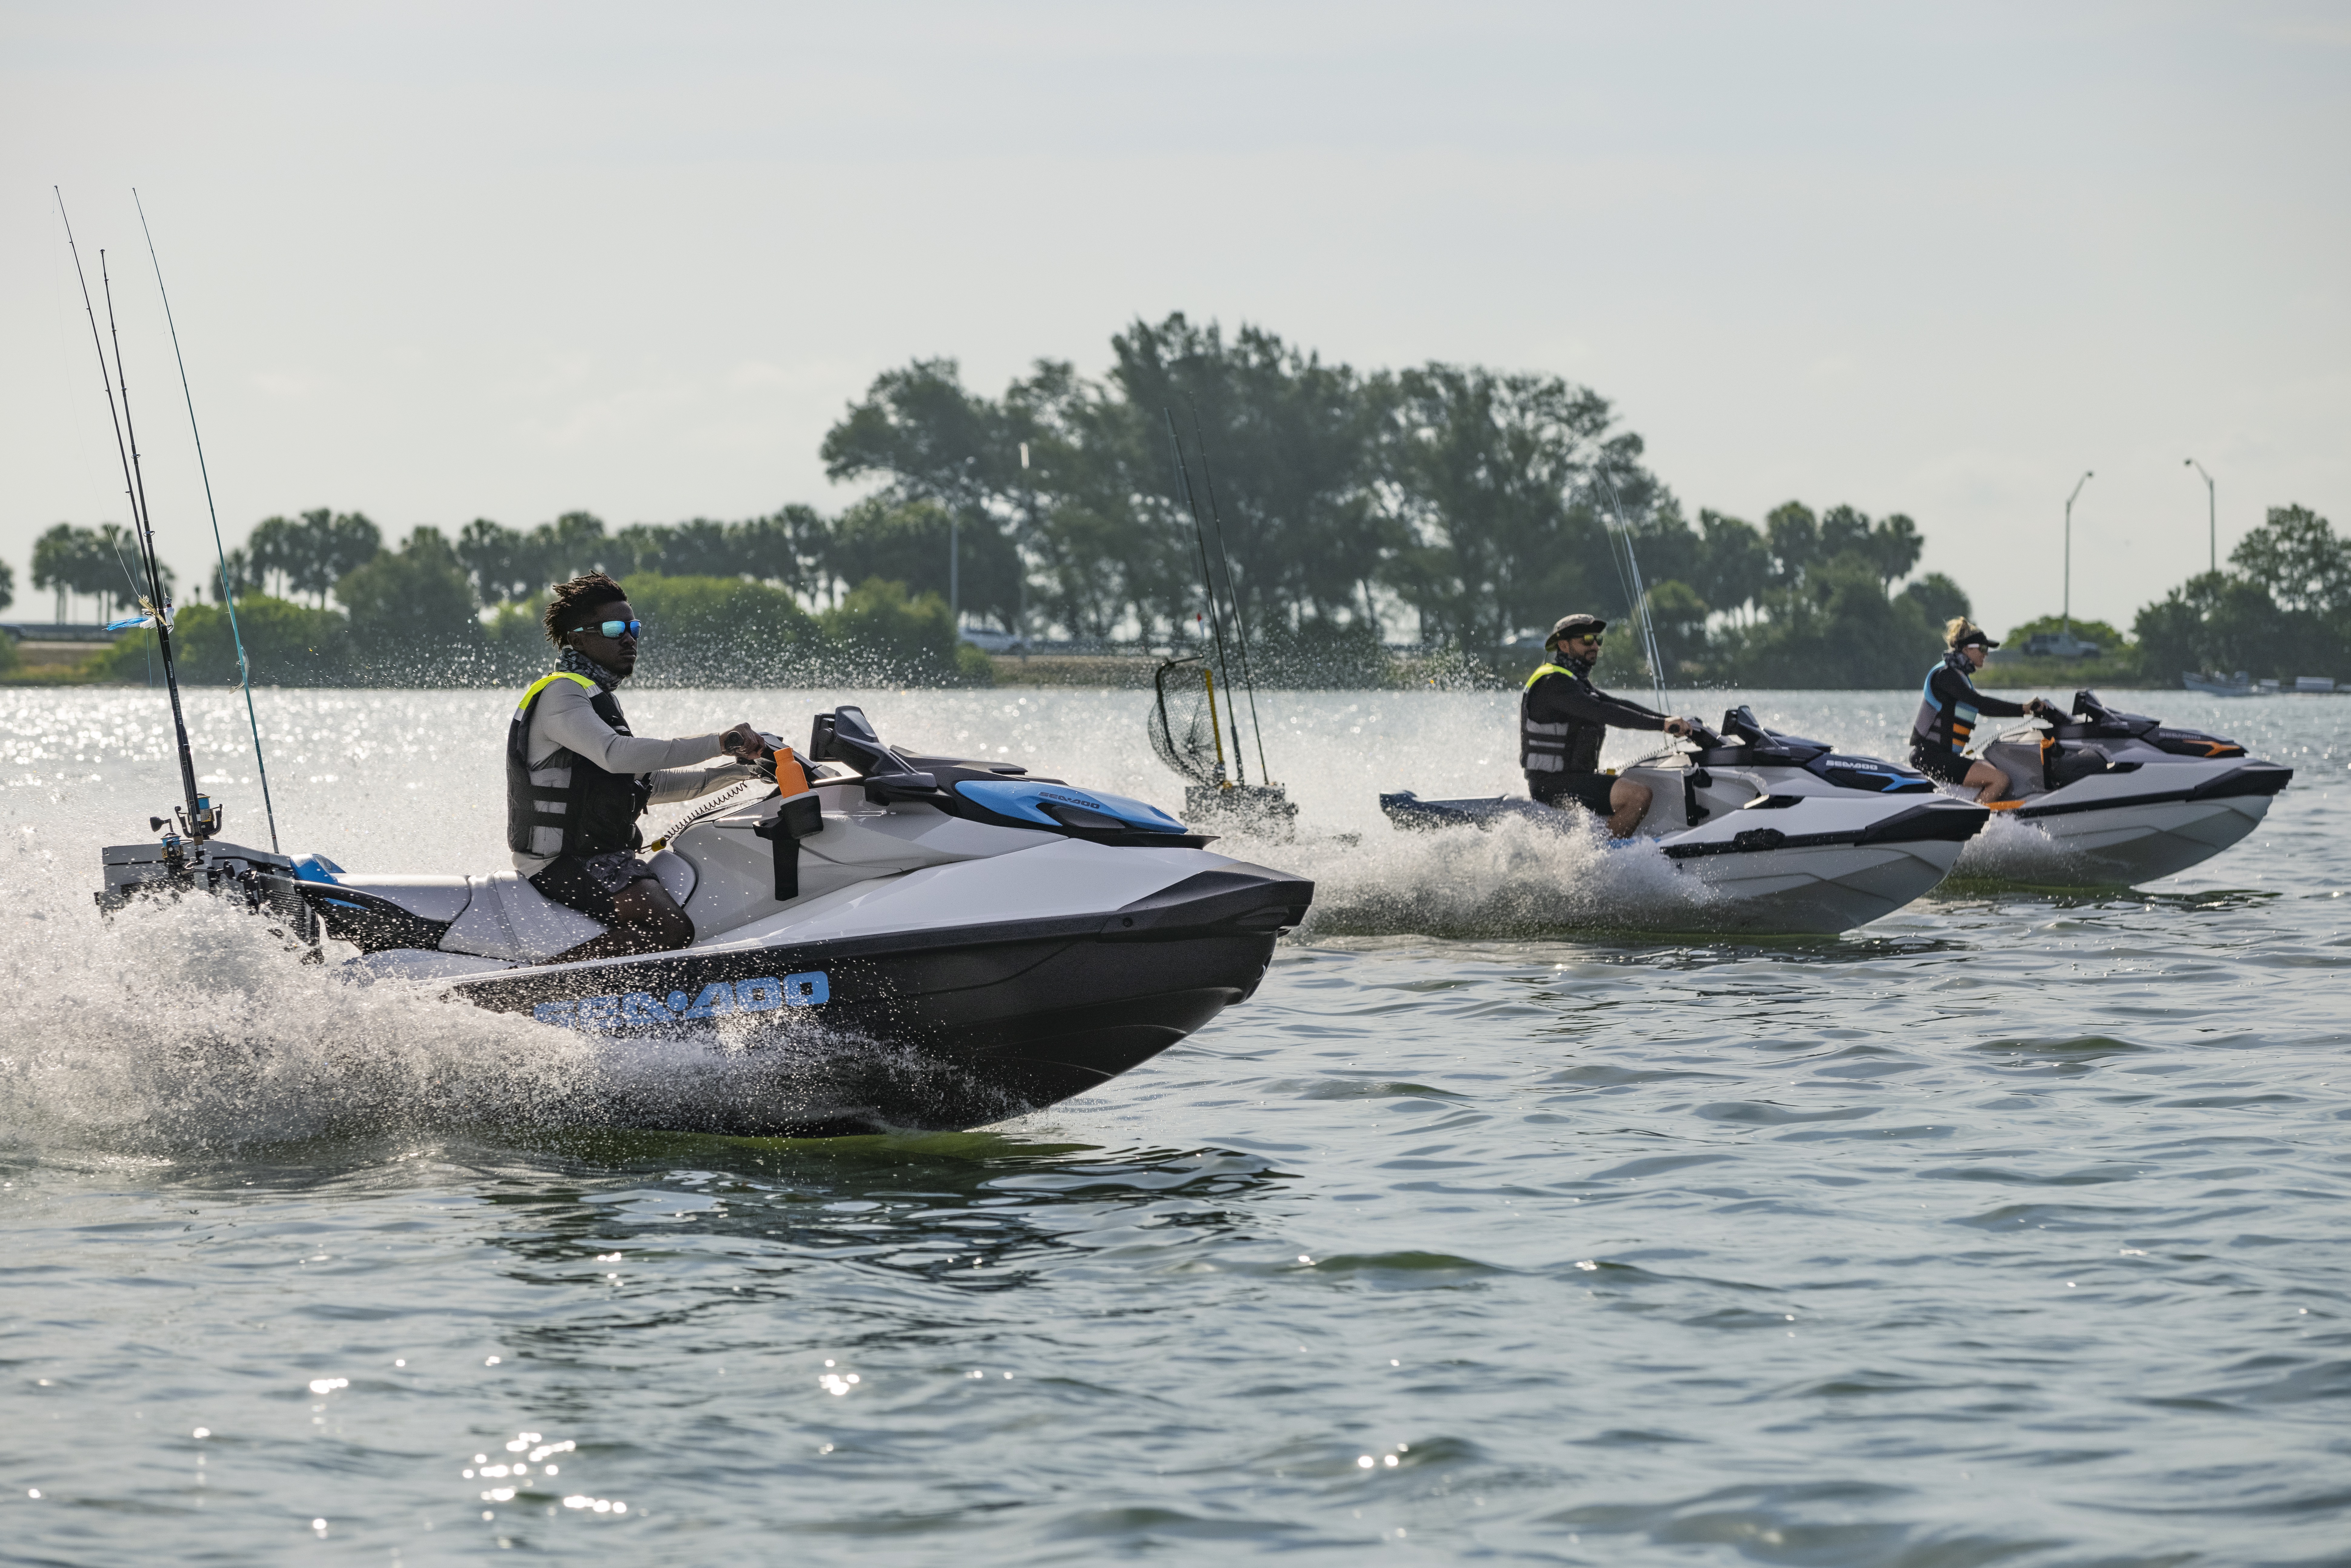 INTRODUCING THE MY24 SEA-DOO LINE-UP